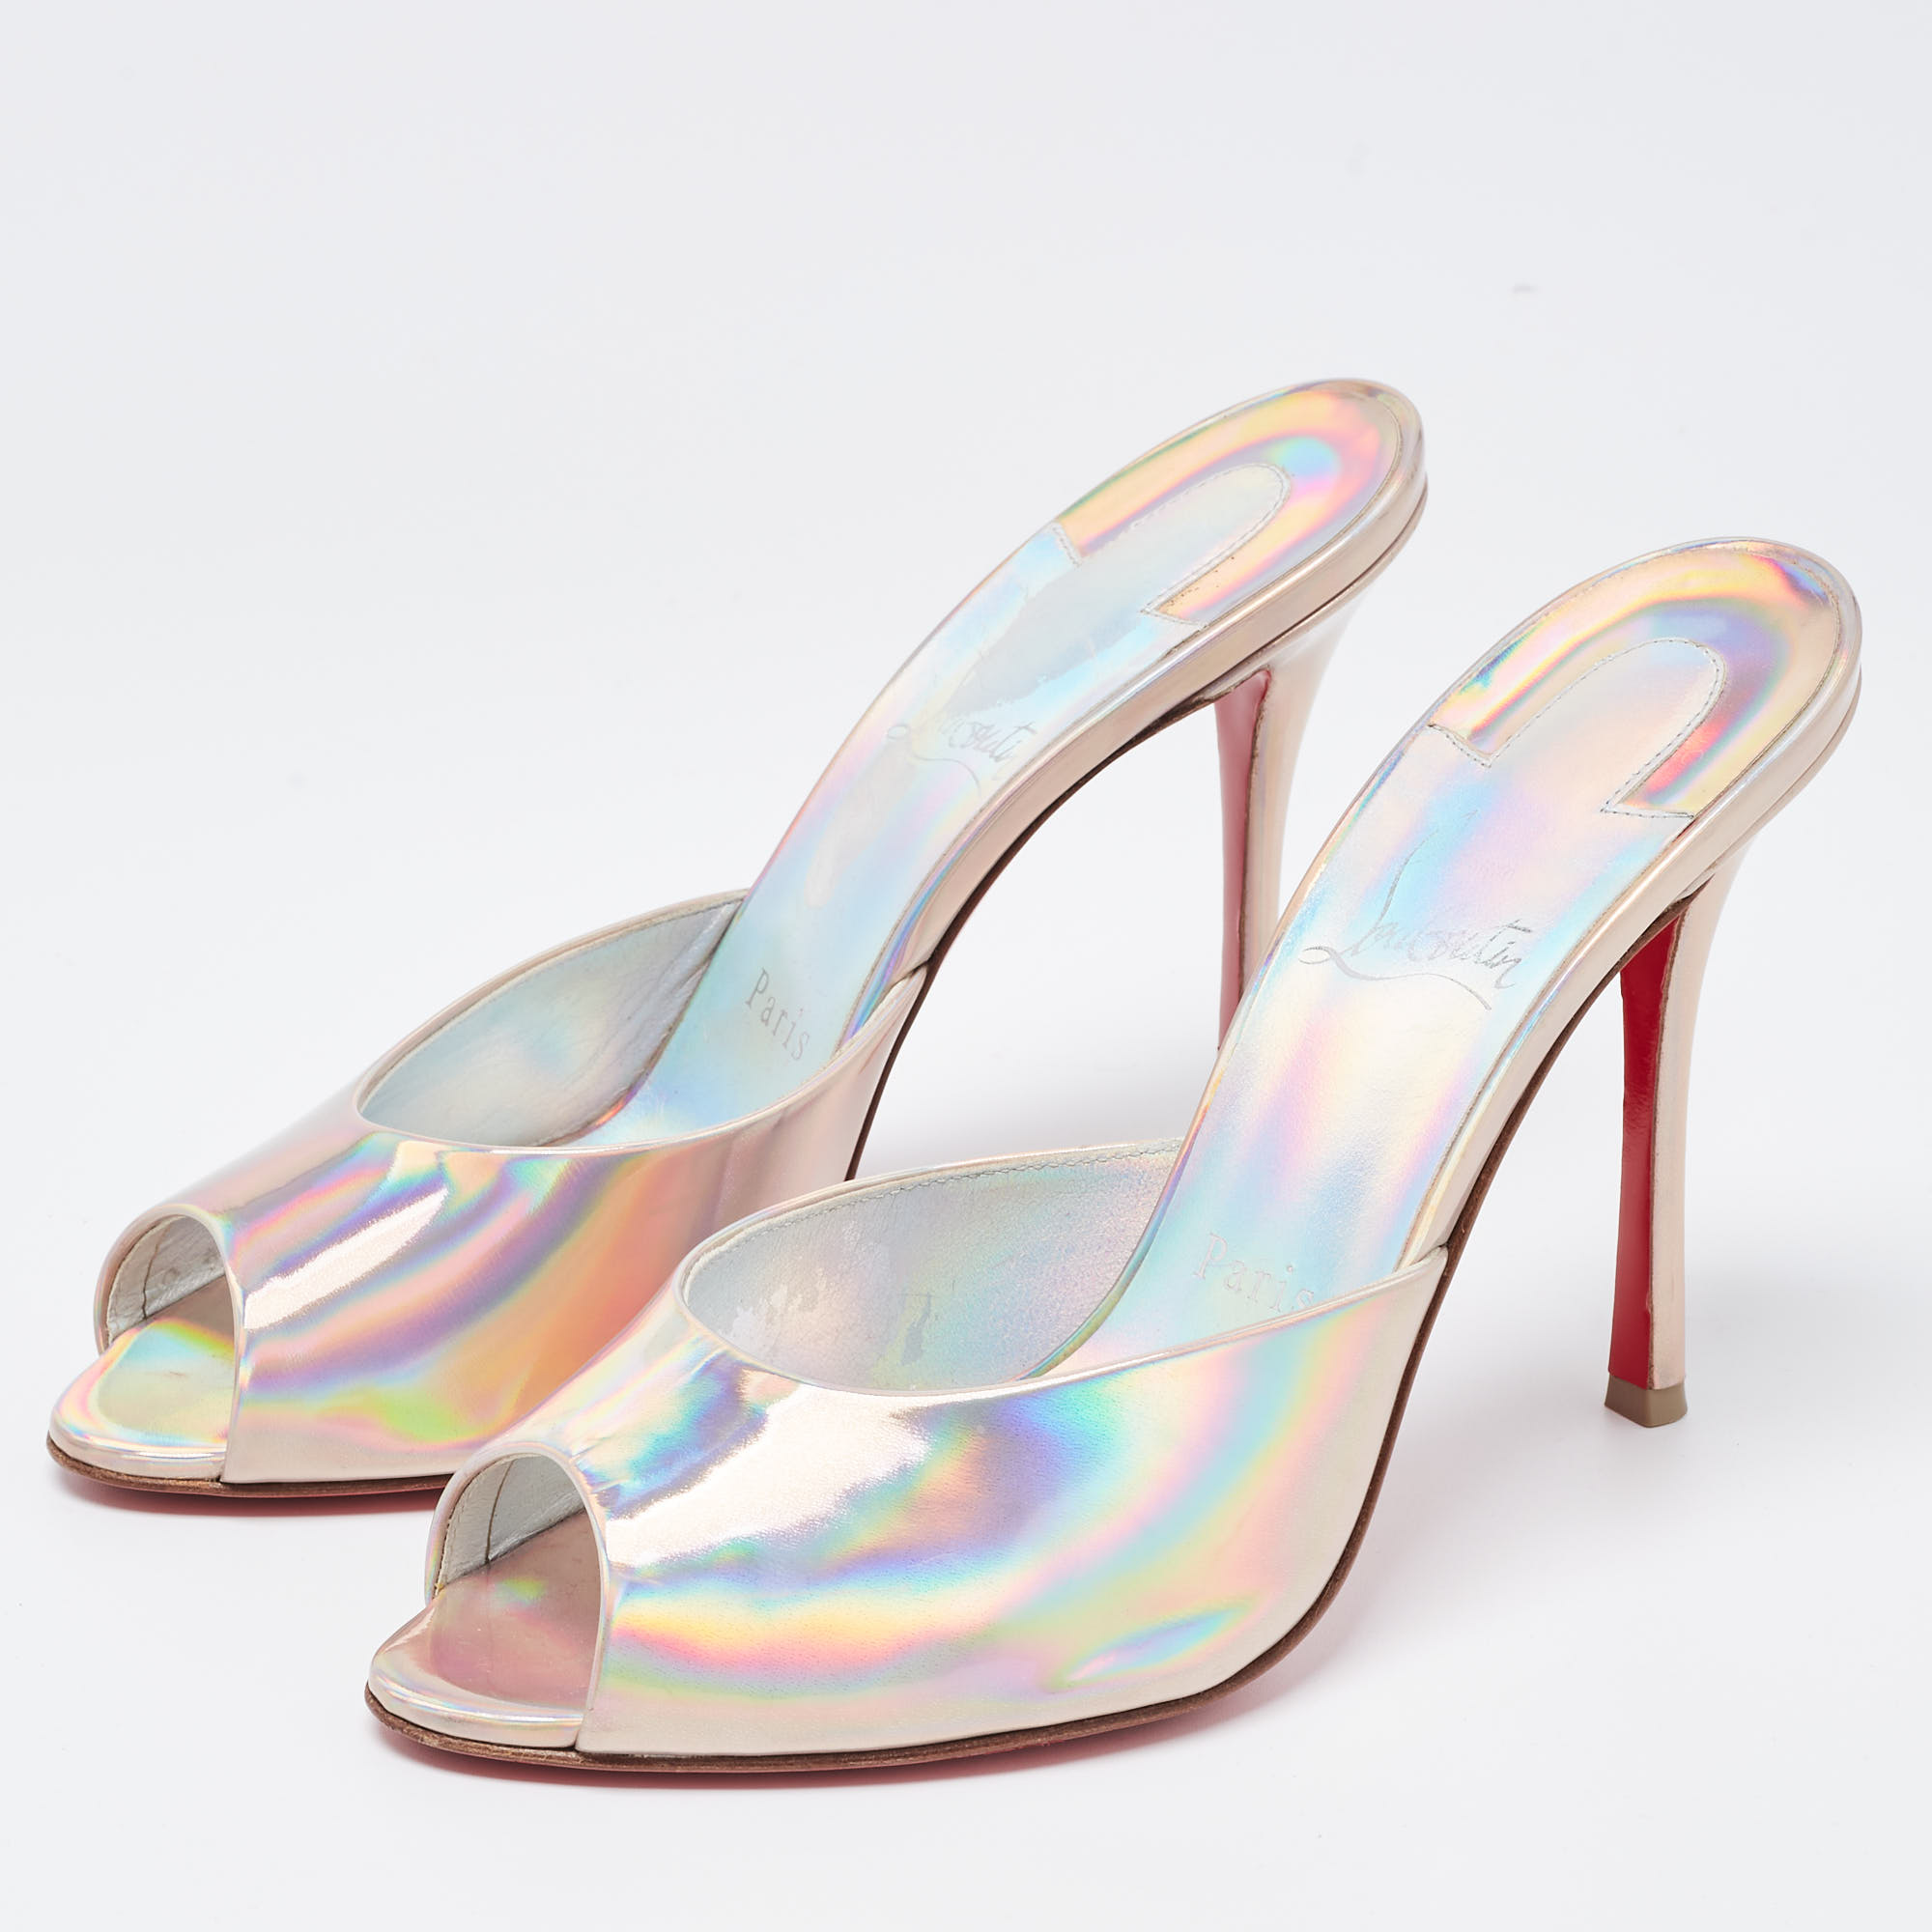 

Christian Louboutin Iridescent Patent Me Dolly Sandals Size, Multicolor